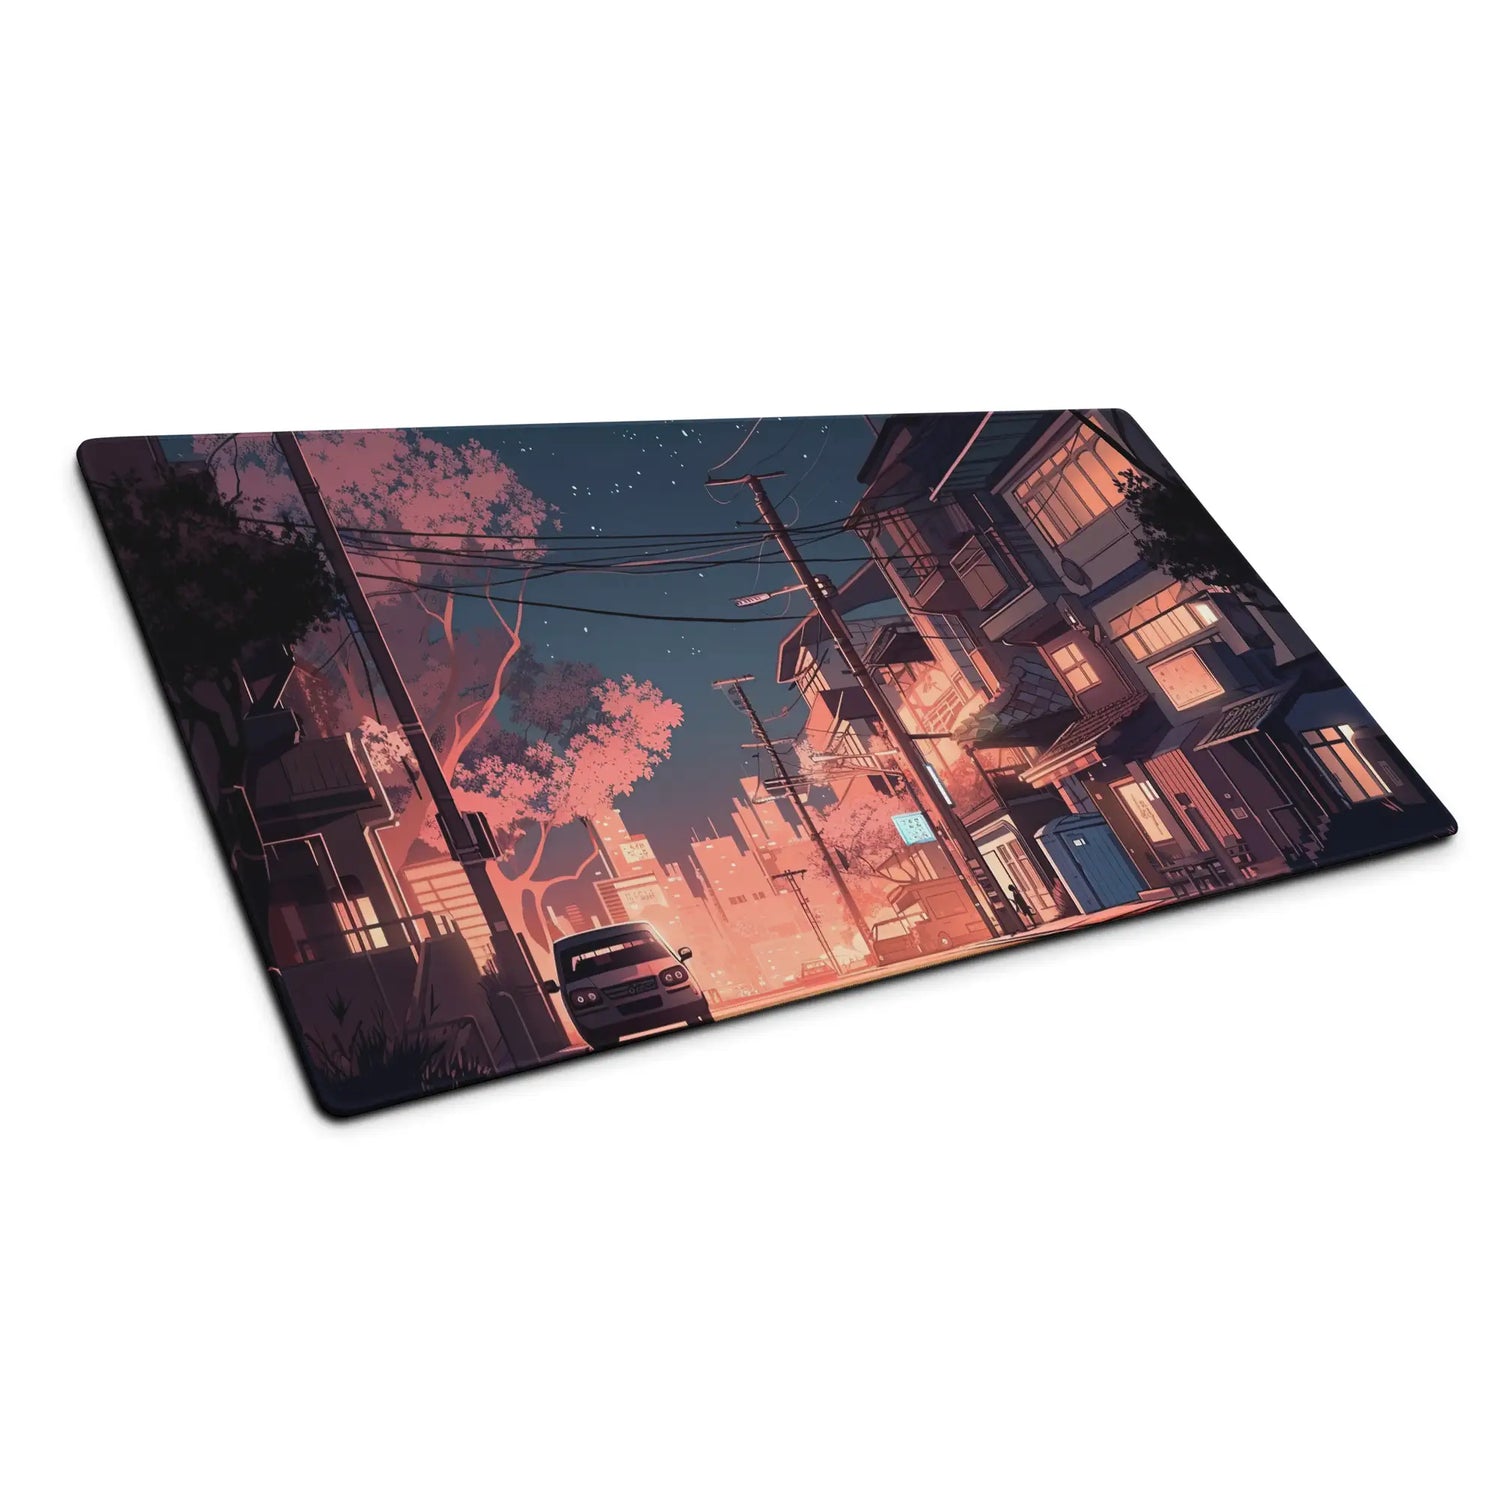 An anime desk mat with an image of a Tokyo street at night.